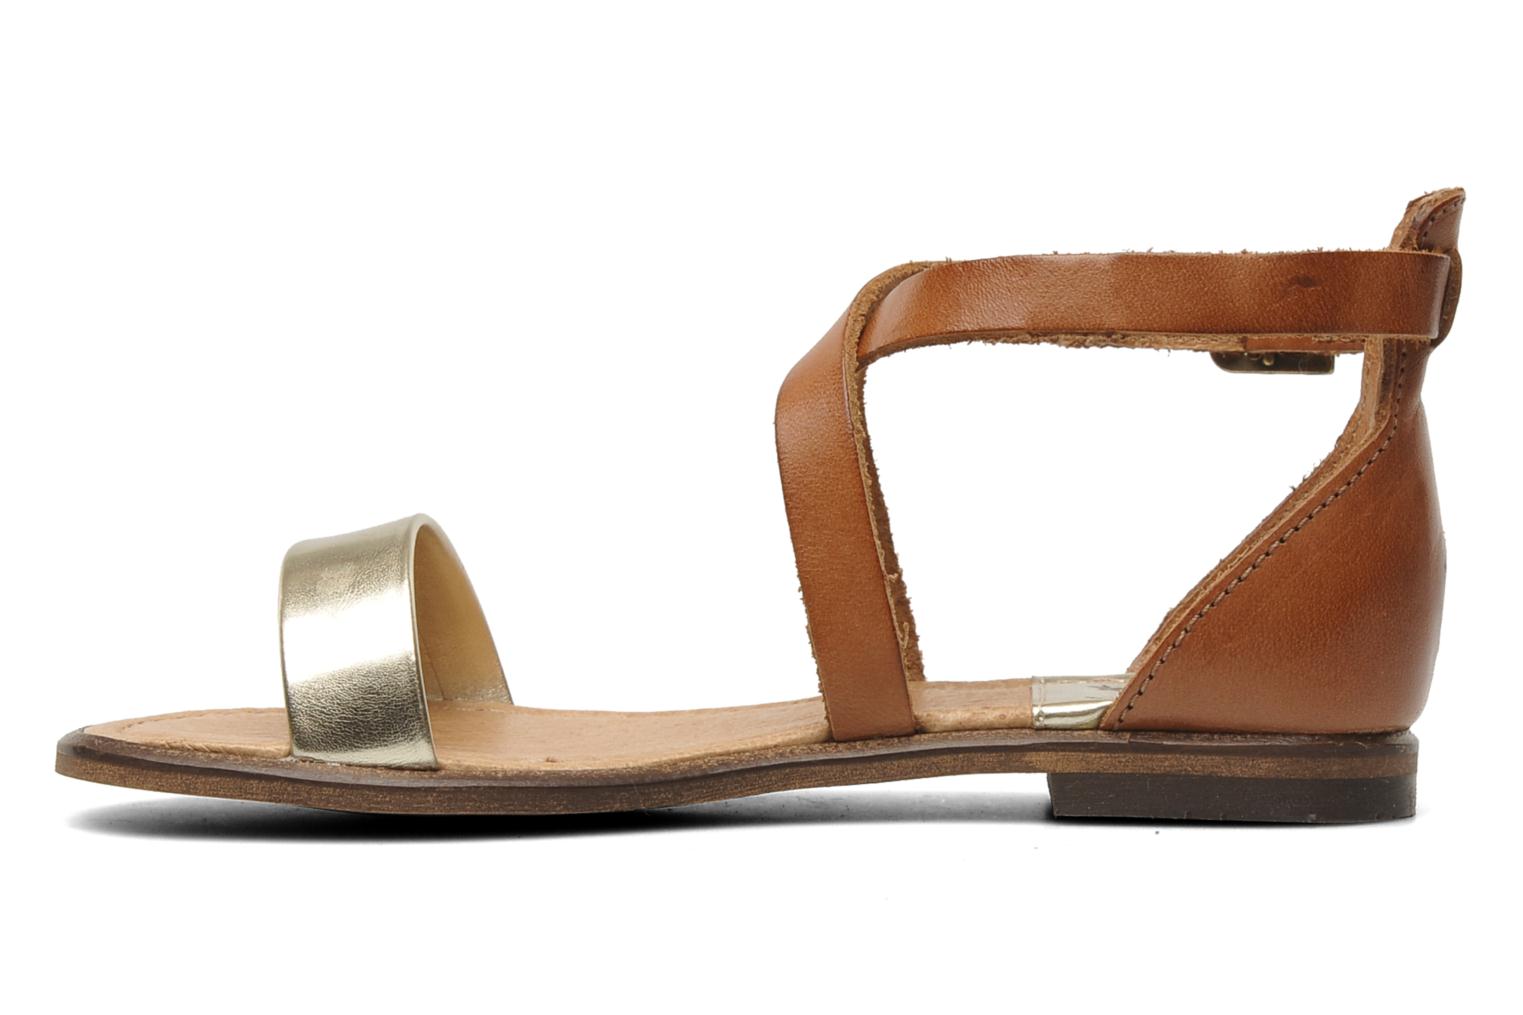 IKKS SIDONE Sandals in Brown at Sarenza.co.uk (171040)